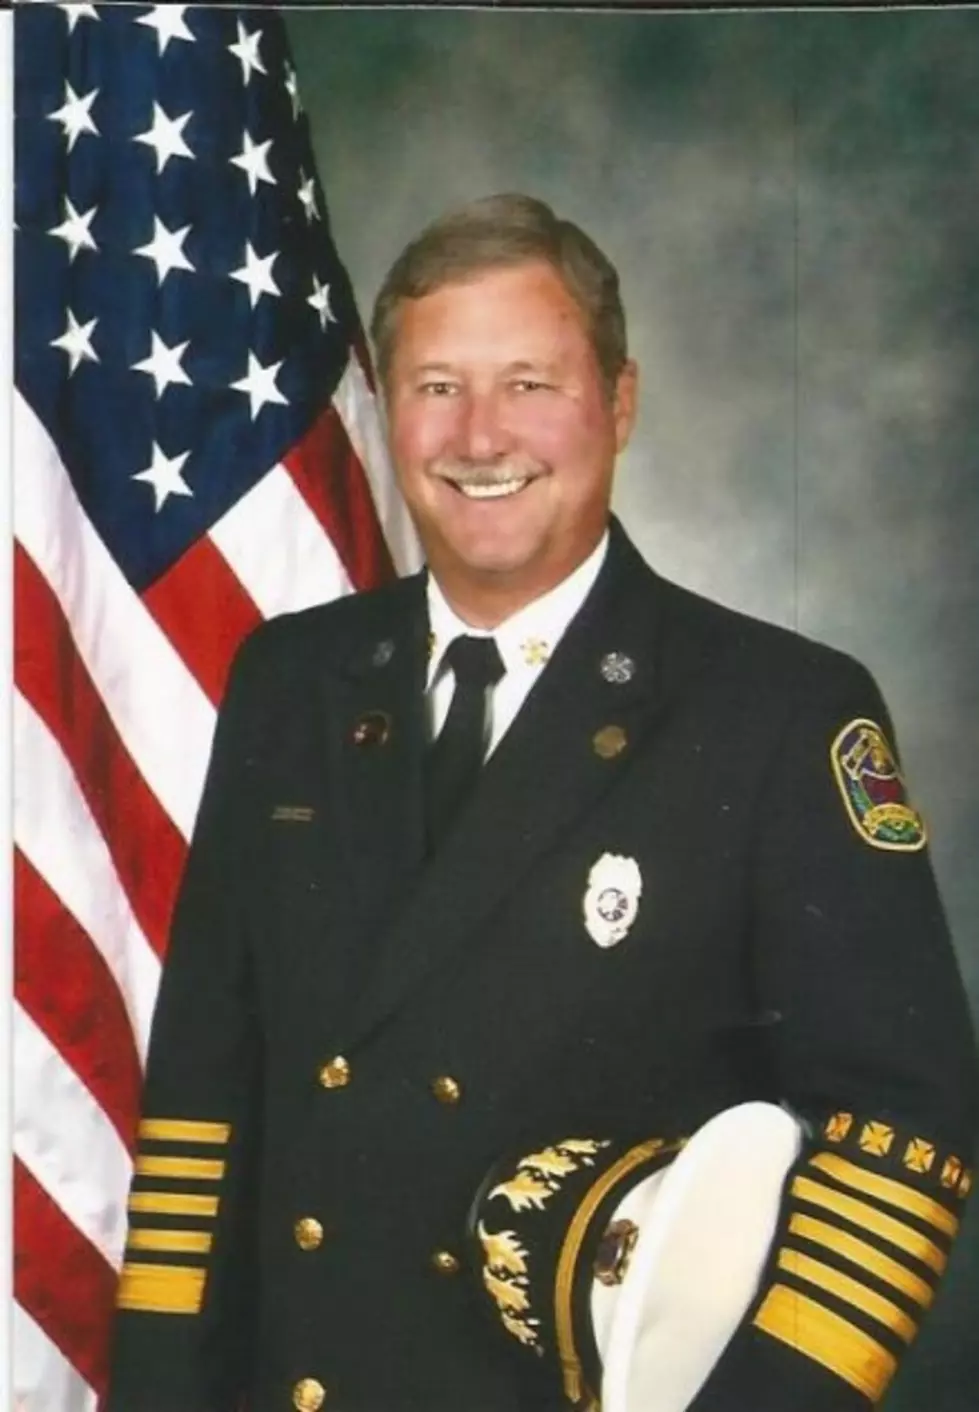 Tuscaloosa Fire Chief Alan Martin Awarded Top State, Regional Honors